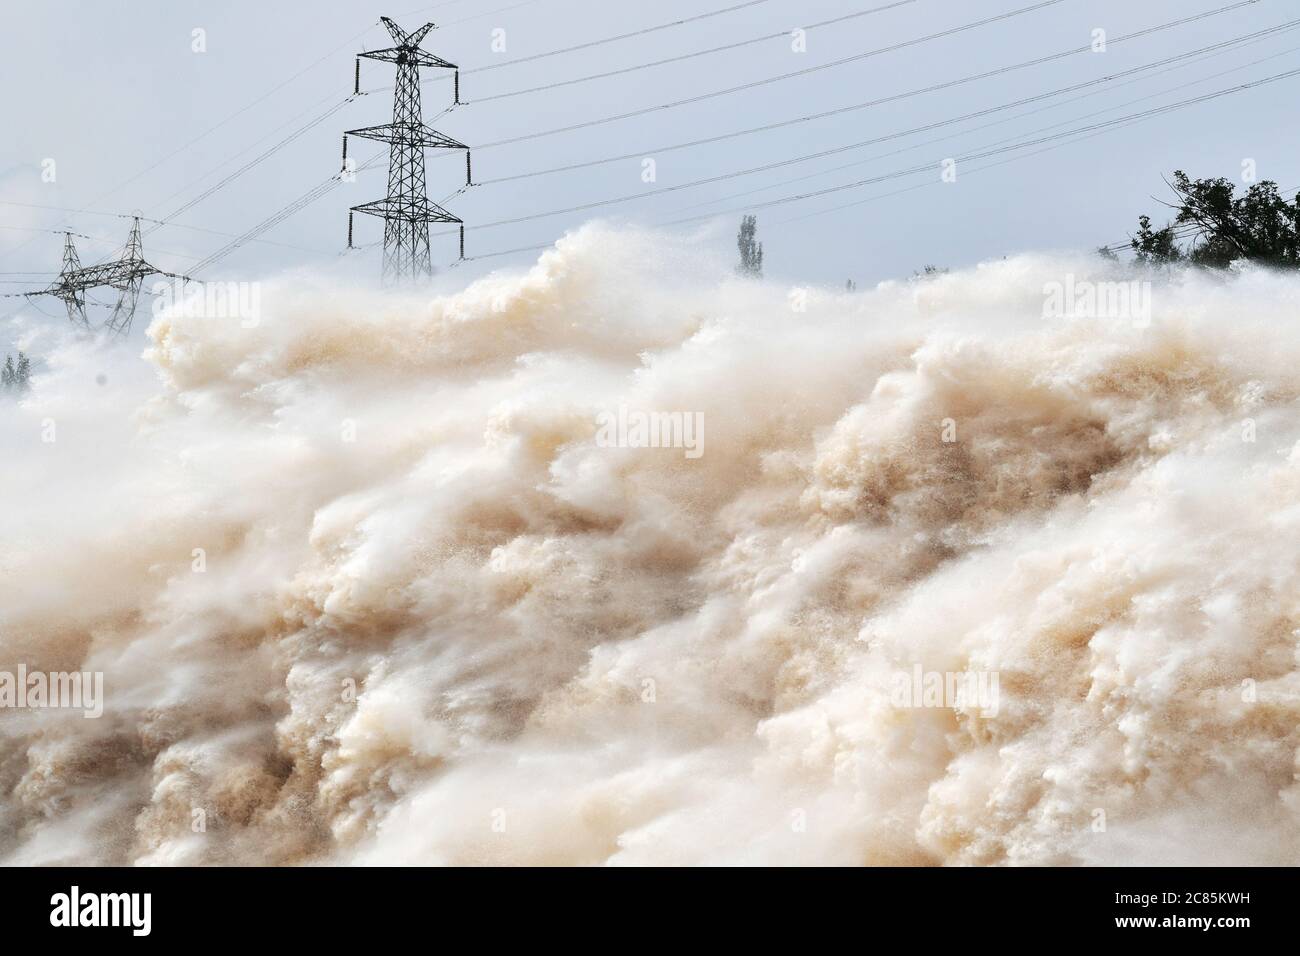 (200721) -- LANZHOU, July 21, 2020 (Xinhua) -- Photo taken on July 21, 2020 shows the Liujiaxia reservoir discharging floodwater in Linxia Hui Autonomous Prefecture, northwest China's Gansu Province. The water flow in the upper stream of the Yellow River has been increasing due to rainfall. The Lanzhou hydrological station saw the second flood of the river this year with the water flow of 3,000 cubic meters per second, which occured at 8:42 p.m. on Monday. Credit: Xinhua/Alamy Live News Stock Photo